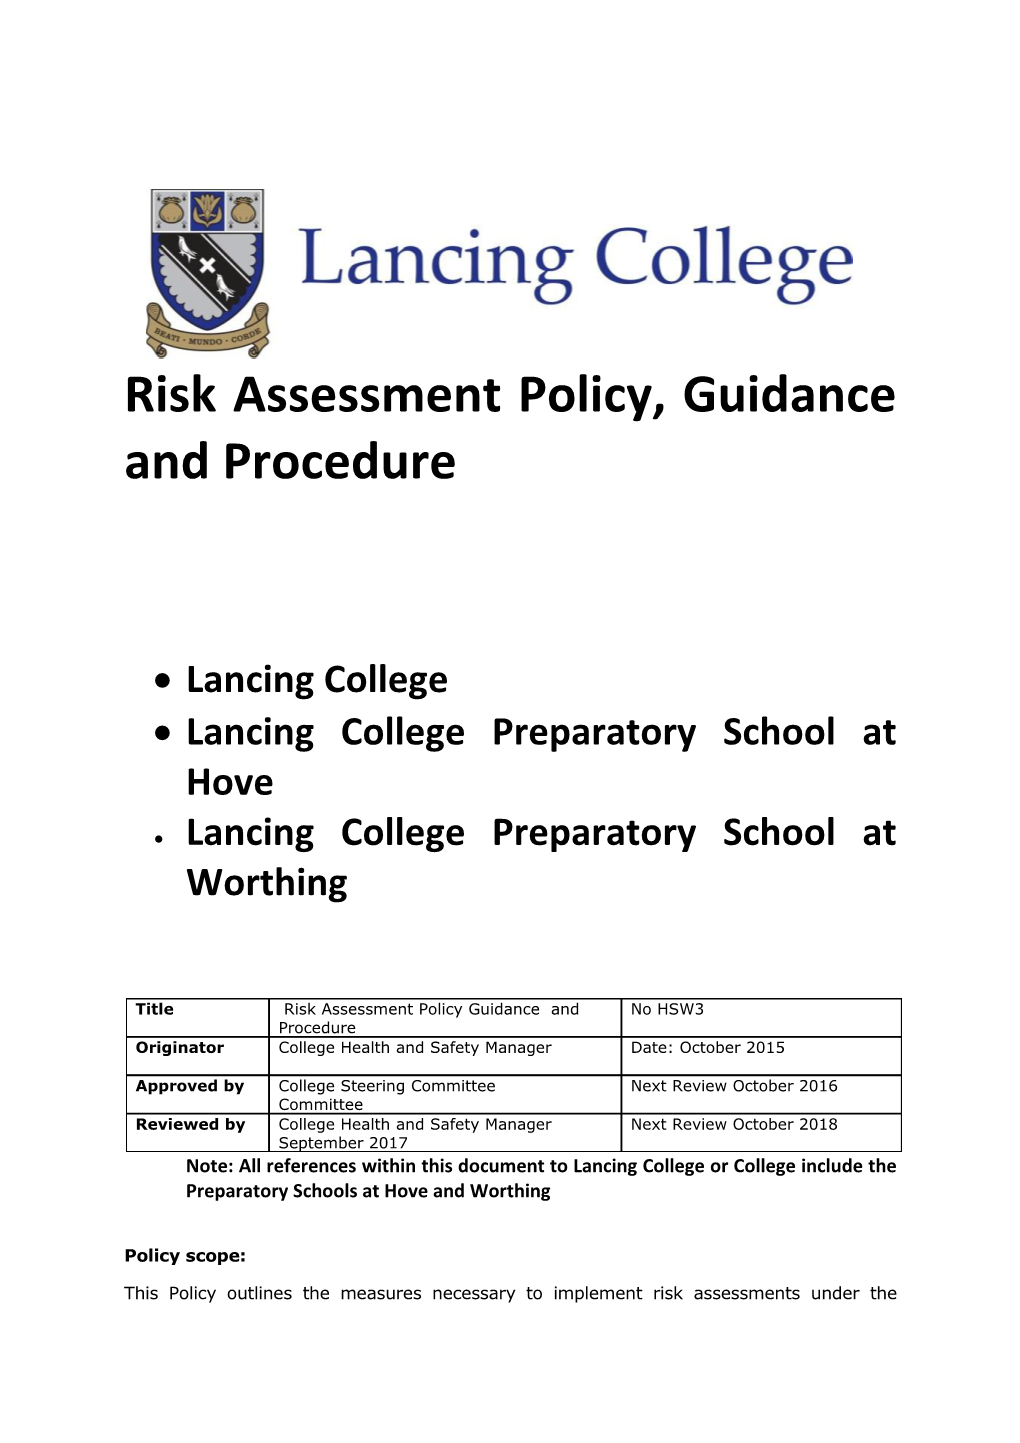 Risk Assessment Policy, Guidance and Procedure